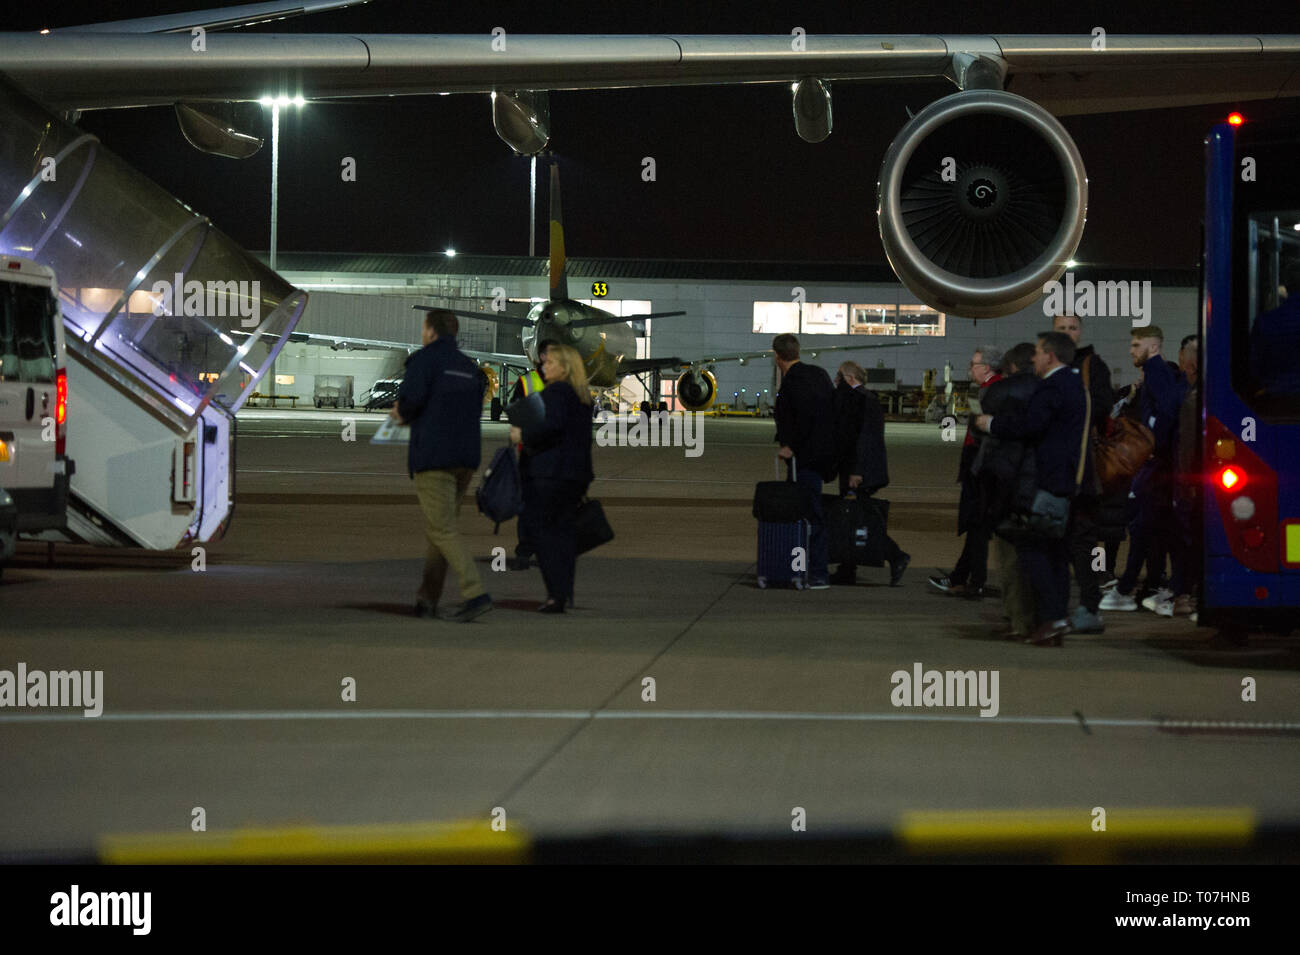 Glasgow, UK. 18 March 2019. The Scotland Football Team seen boarding their luxury jetliner private aircraft in the early hours seen  at Glasgow Airport moments before departing for Kazakhstan to play a game on Wednesday.  The flight was due to take off at 11pm, however due to an unforeseen problem where the pilot had to come out of the flight deck and onto the tarmac and speak with ground crew, the flight eventually took off in the early hours of today. Credit: Colin Fisher/Alamy Live News Stock Photo